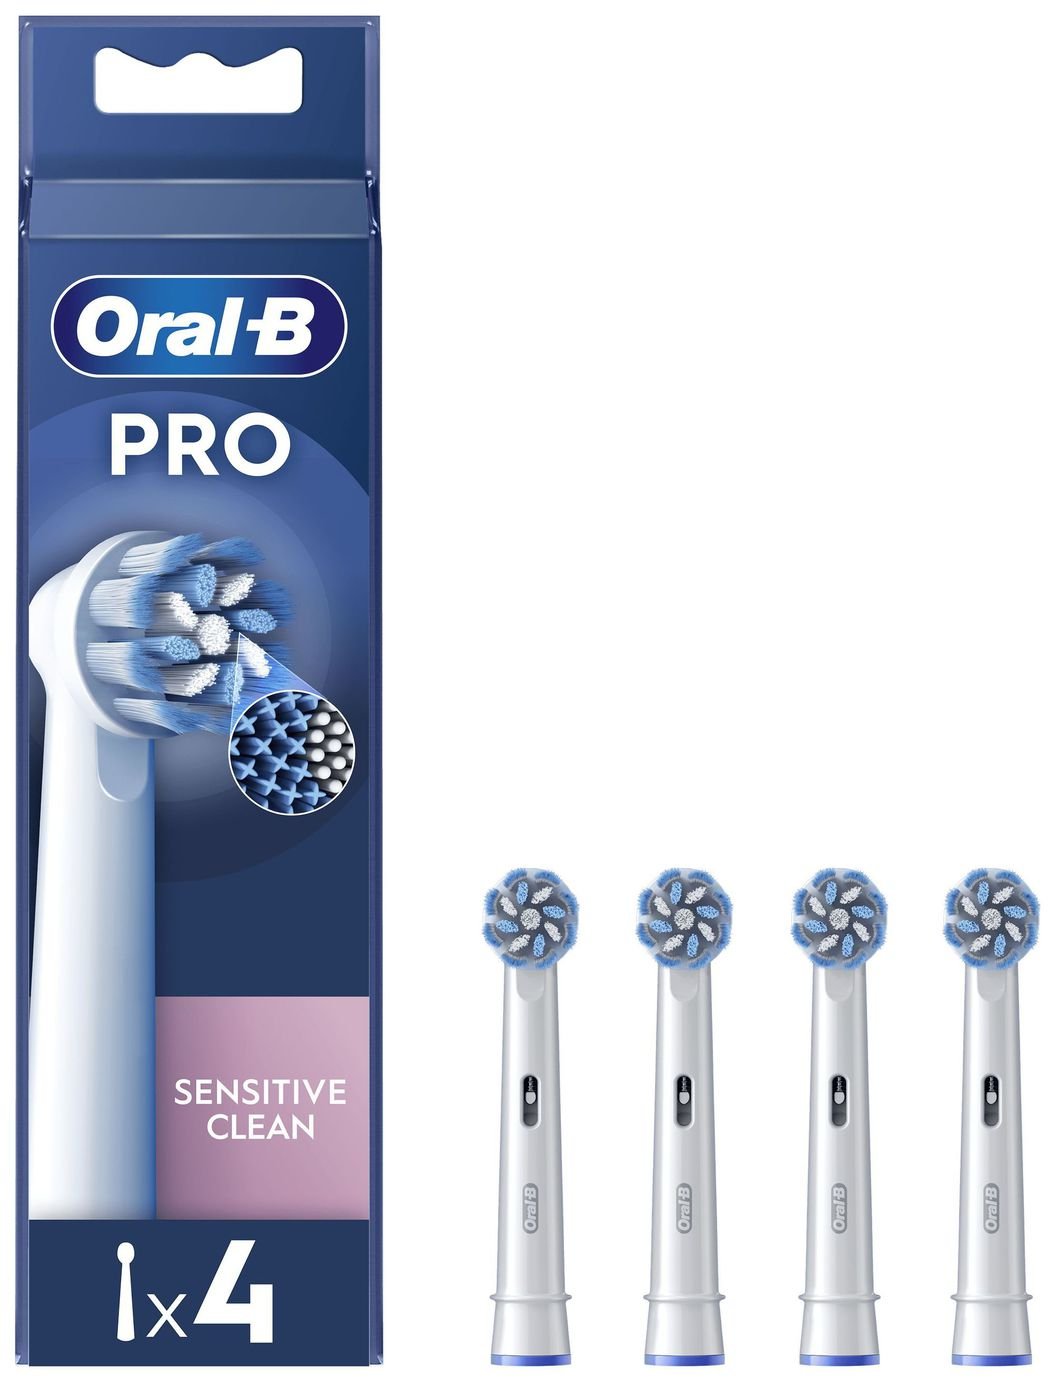 Oral-B Pro Sensitive Clean Electric Toothbrush Heads-4 Pack